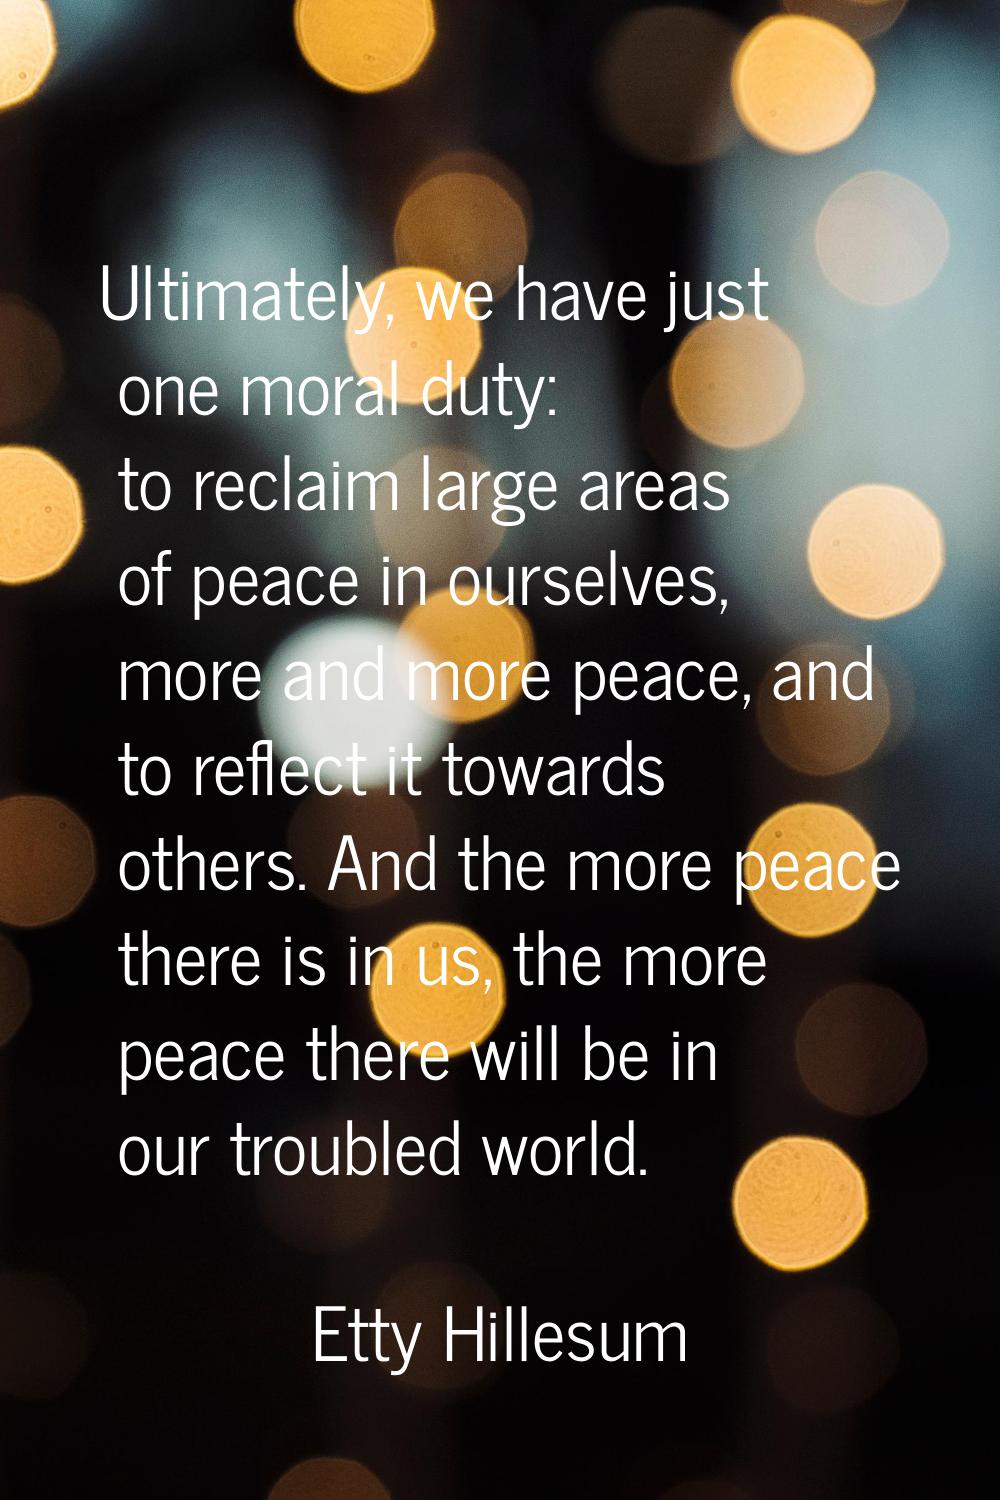 Ultimately, we have just one moral duty: to reclaim large areas of peace in ourselves, more and mor